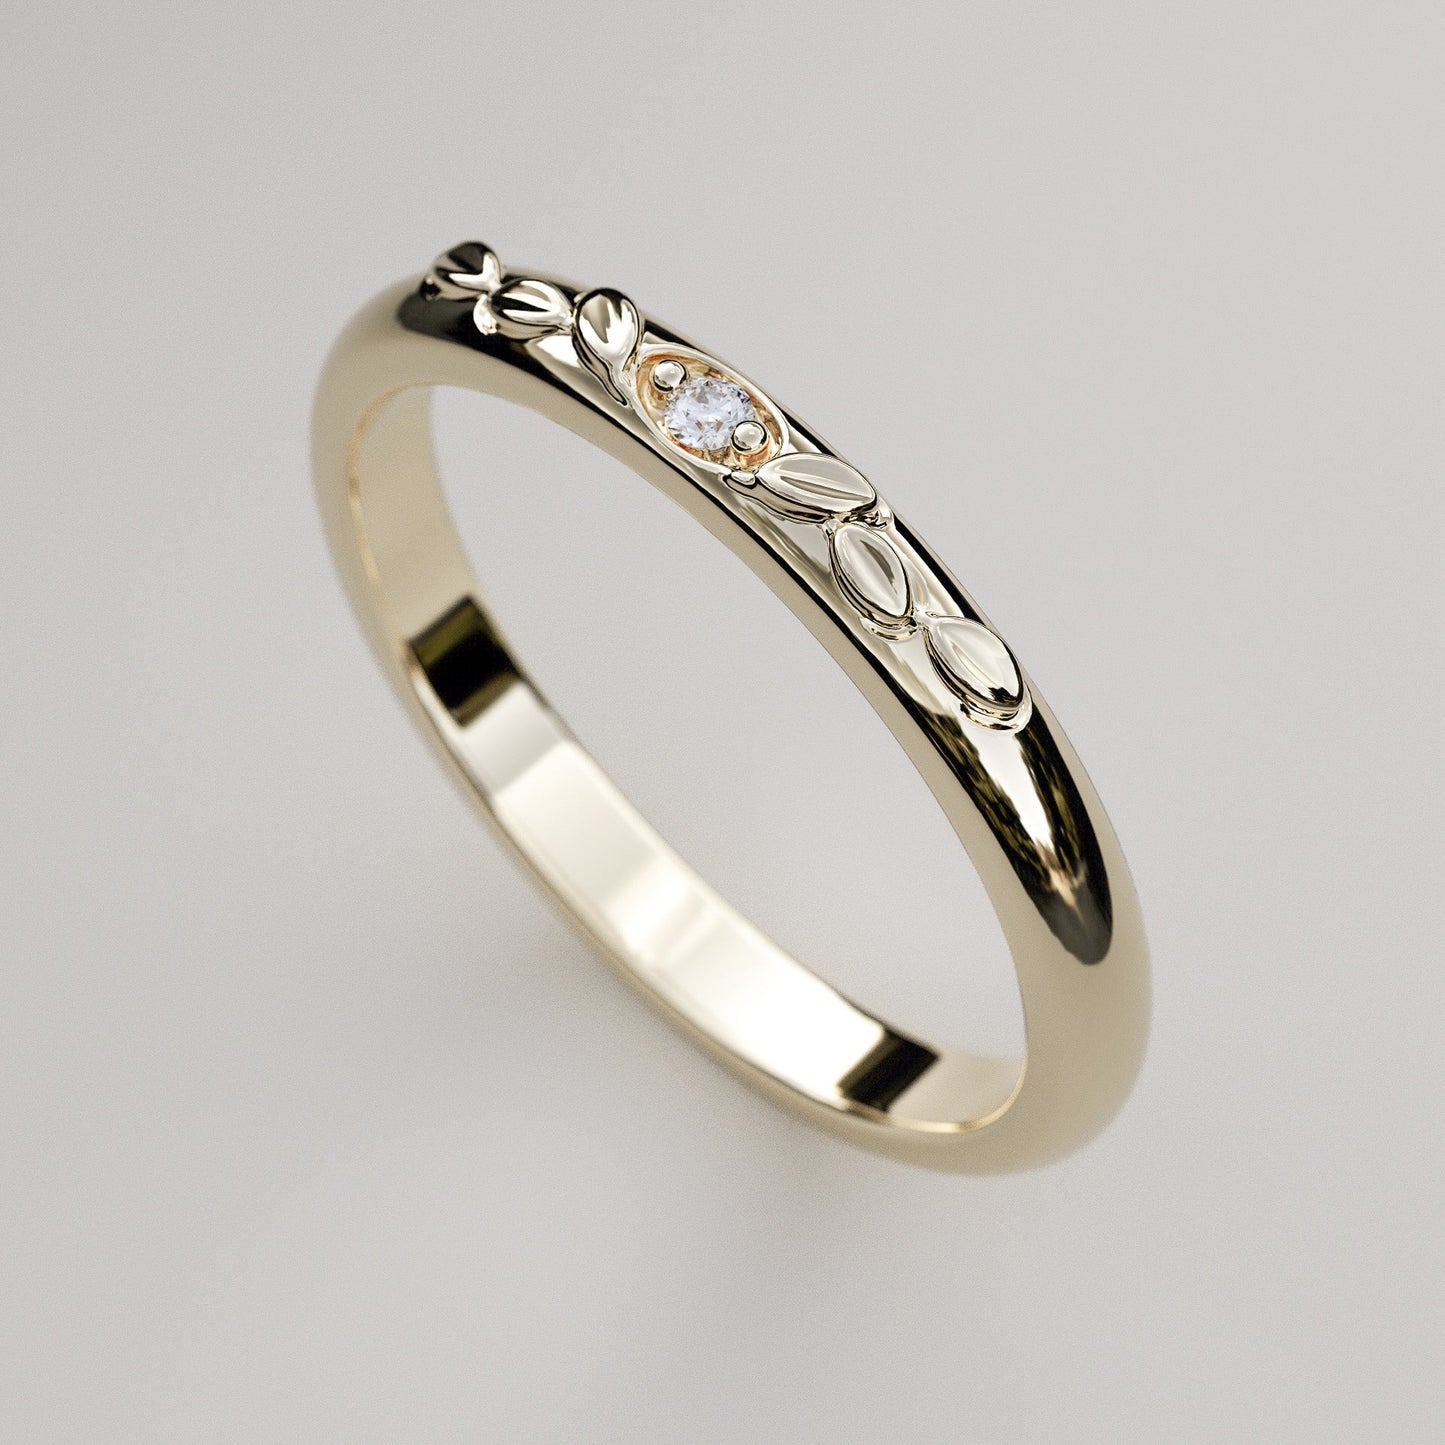 Antique inspired leaves and diamond domed ring in 14k or 18k yellow gold